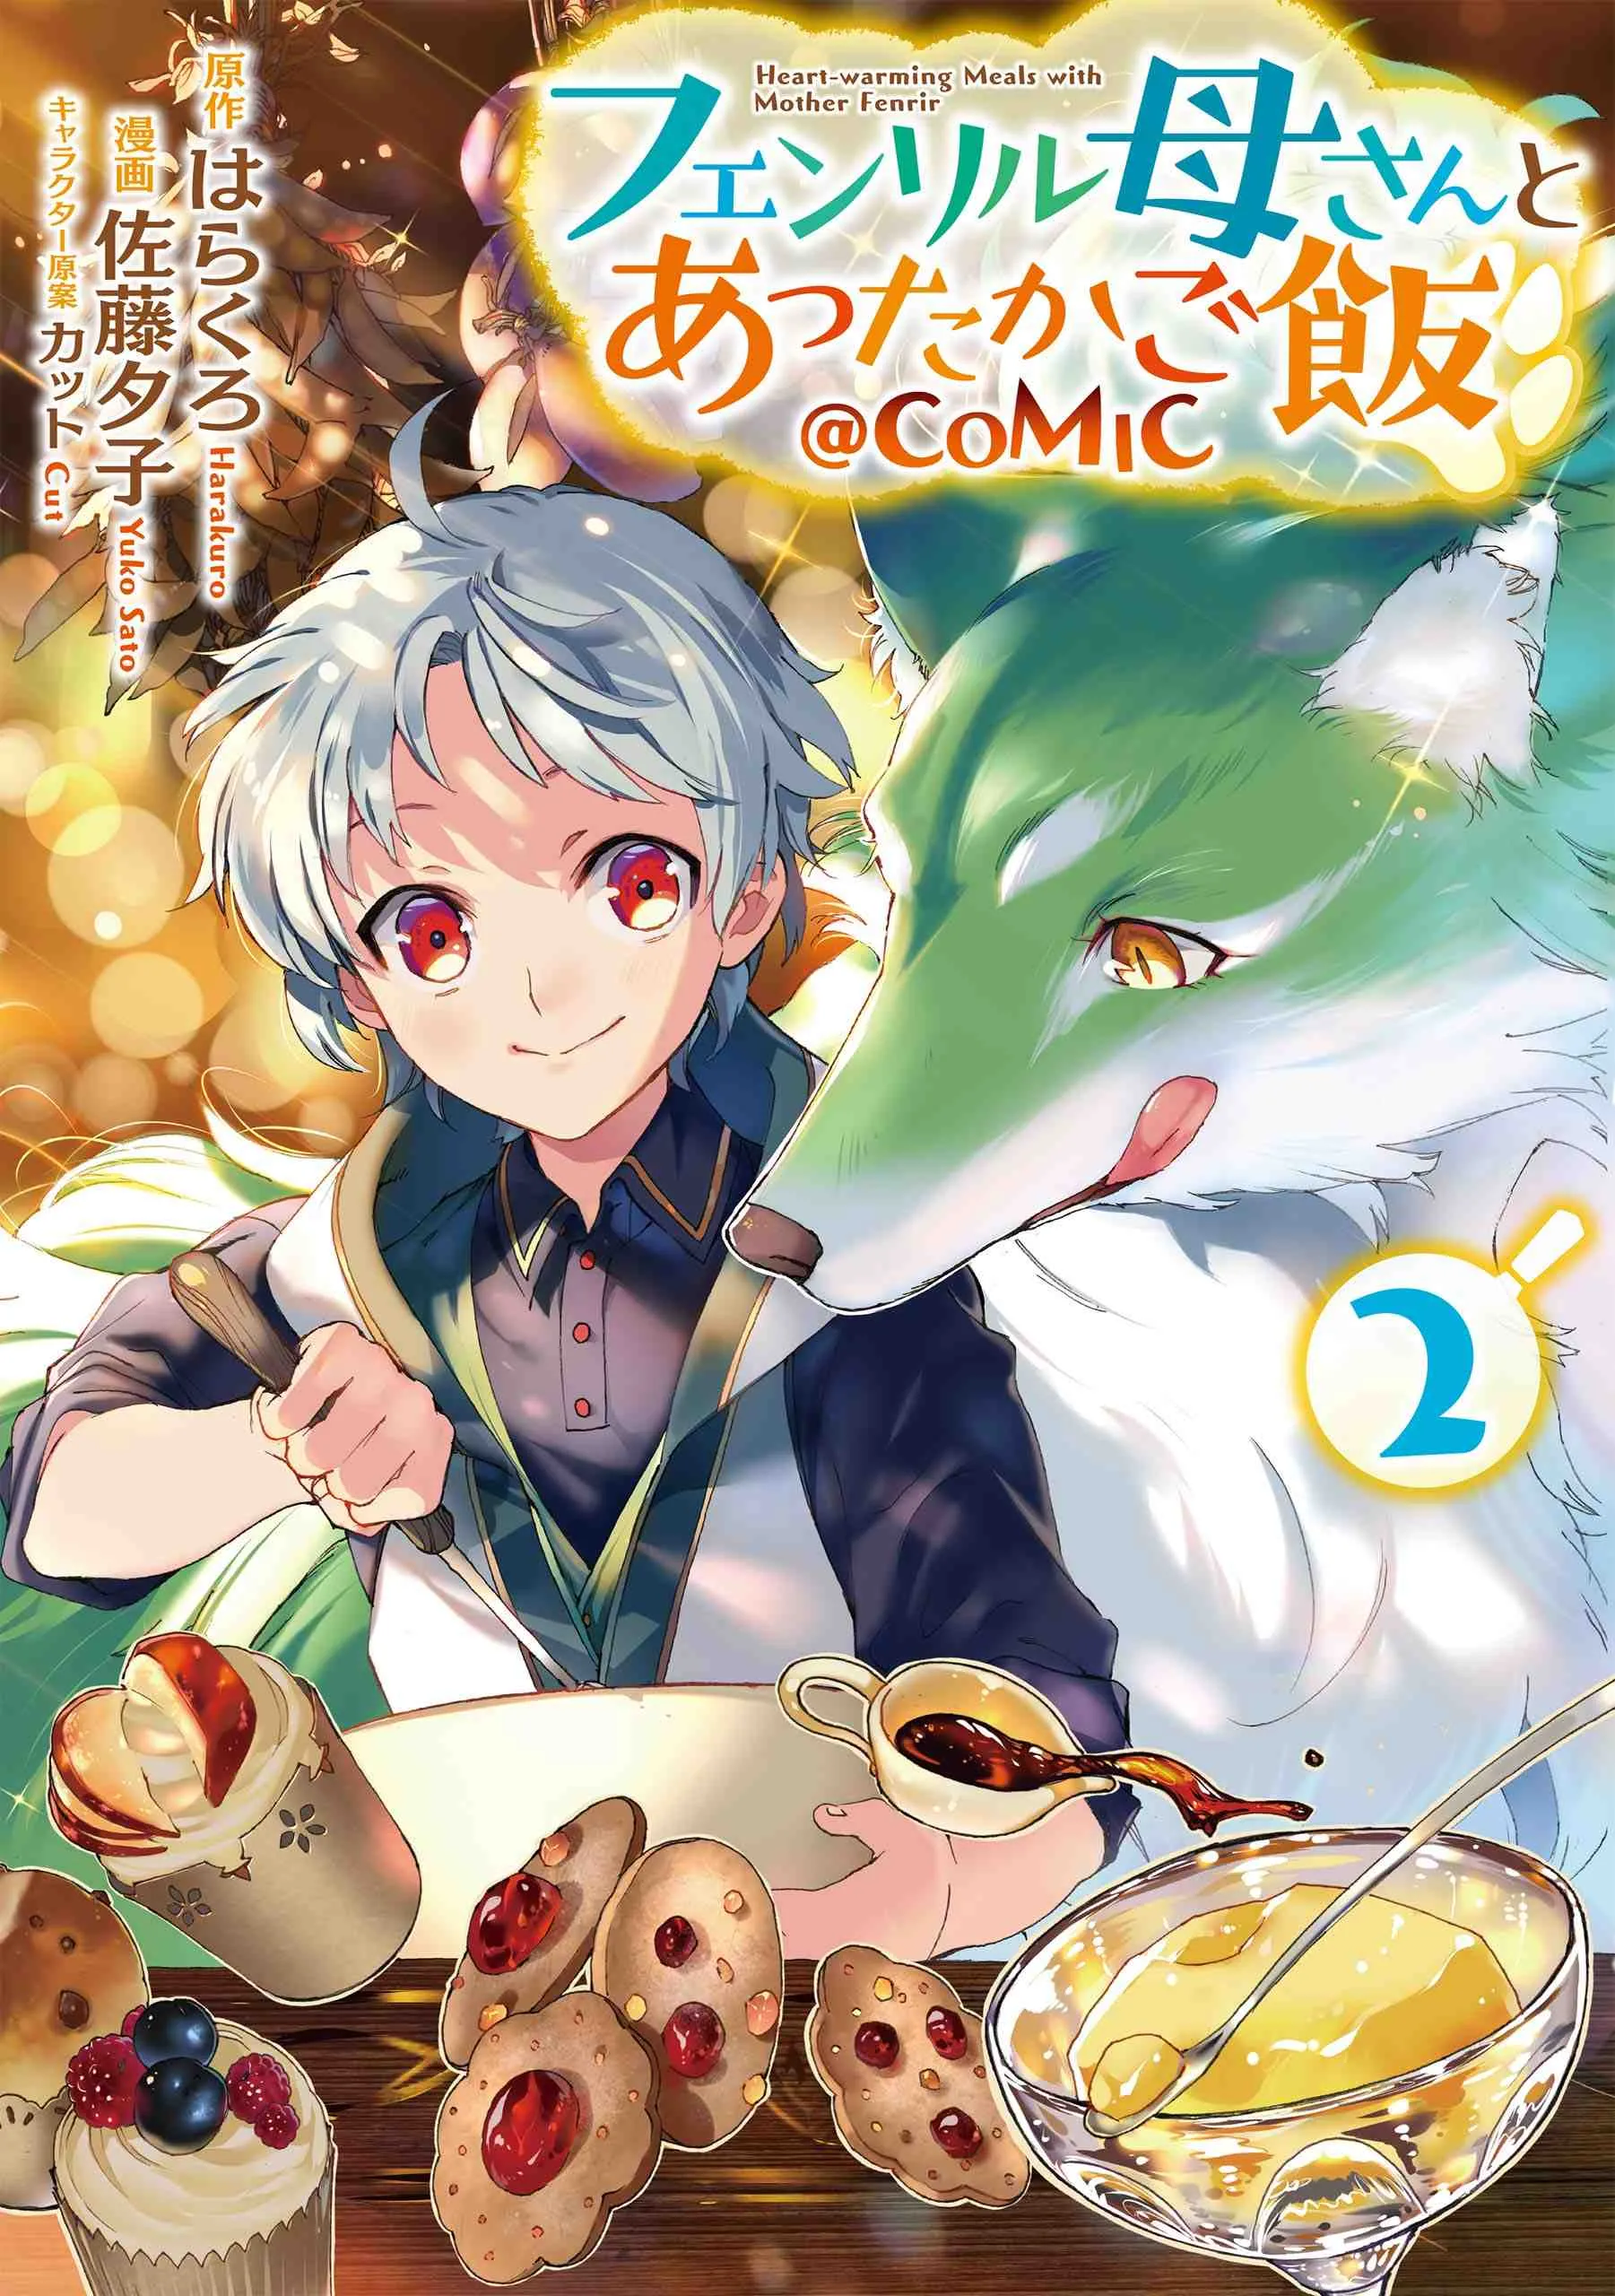 HEART-WARMING MEALS WITH MOTHER FENRIR THUMBNAIL